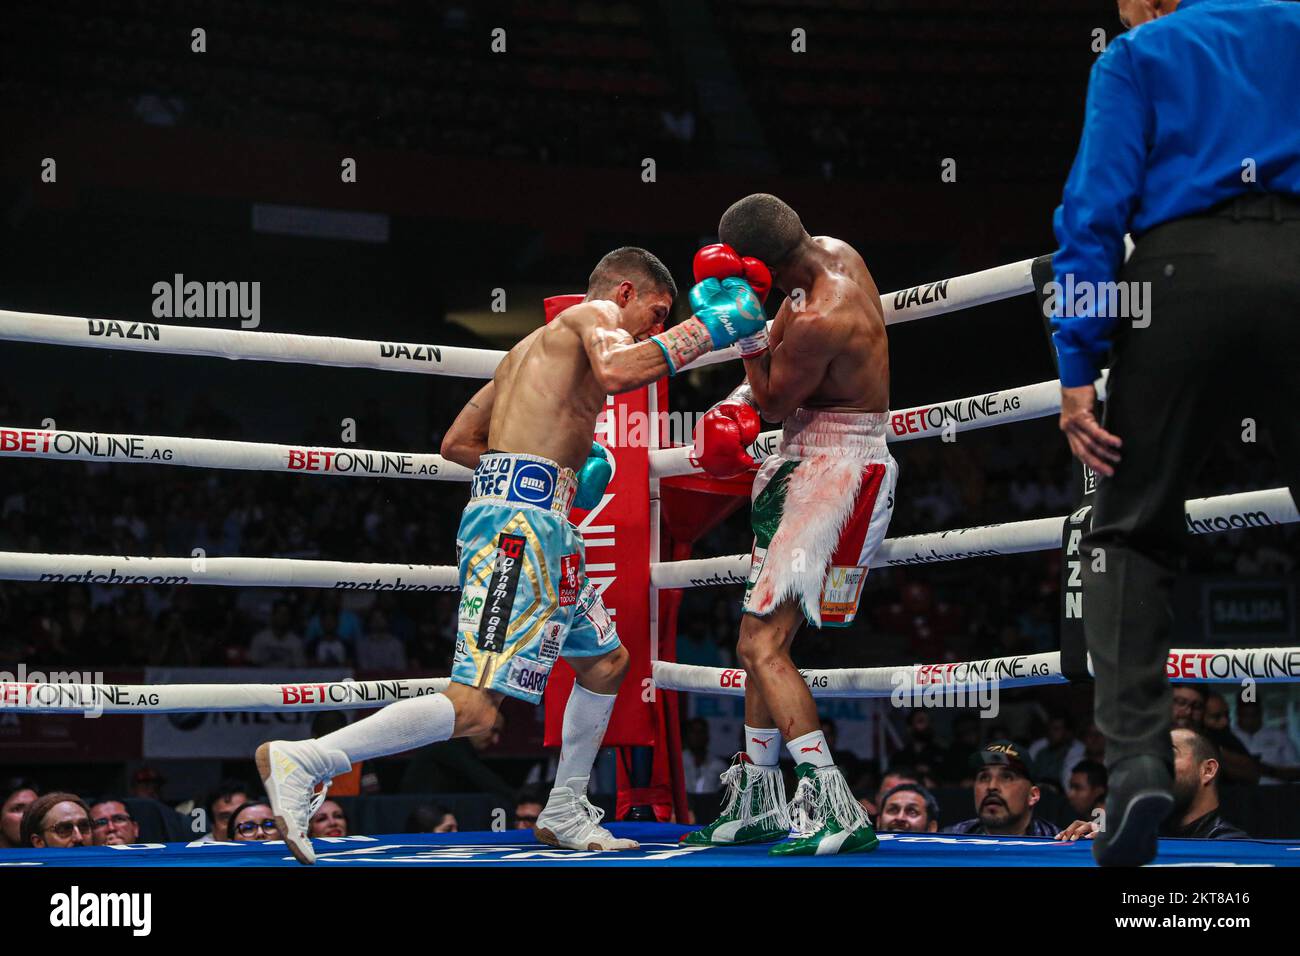 HERMOSILLO, MEXICO - SEPTEMBER 03: Hector Flores (blue gloves) fight against Sivenathi 'Special One' Nontshinga (red gloves) for the IBF light flyweight world championship, ,during the WBC Superfly title fight between Juan Francisco Gallo Estrada and Argi Cortés on September 3, 2022 in Hermosillo, Mexico. (Photo by Luis Gutierrez/Norte Photo) Stock Photo